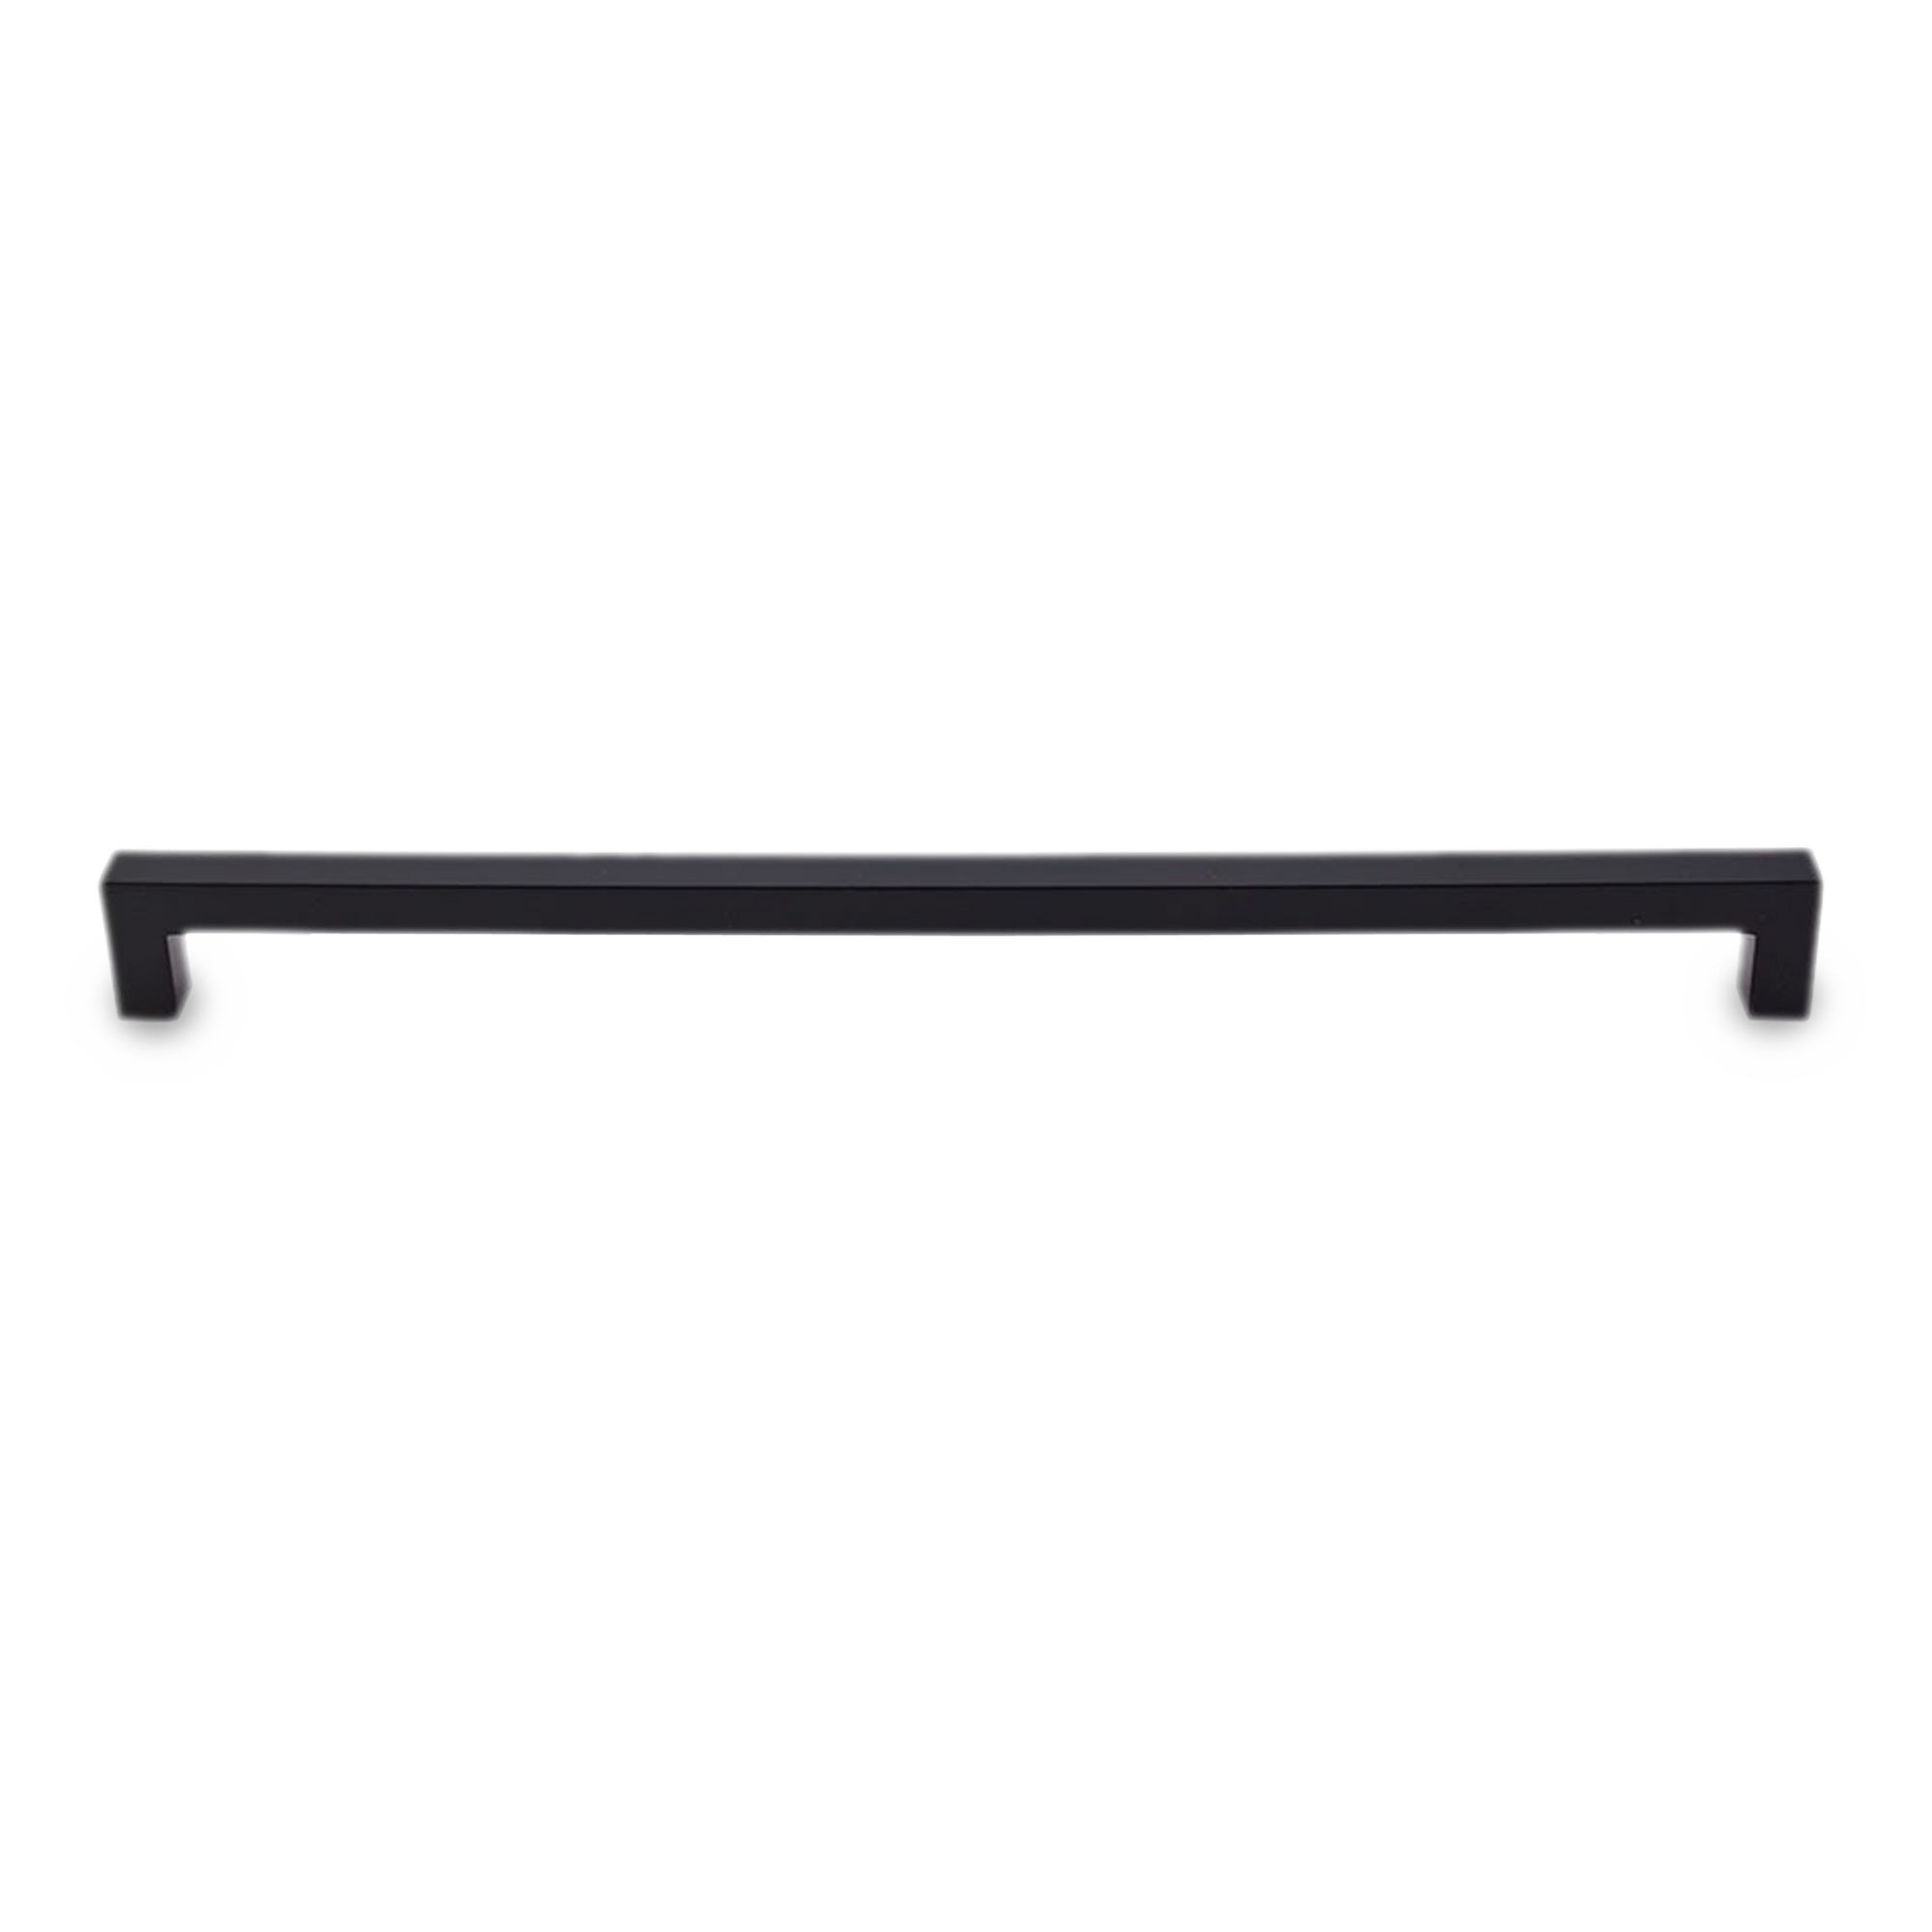 A modern, simple, square bar pull.